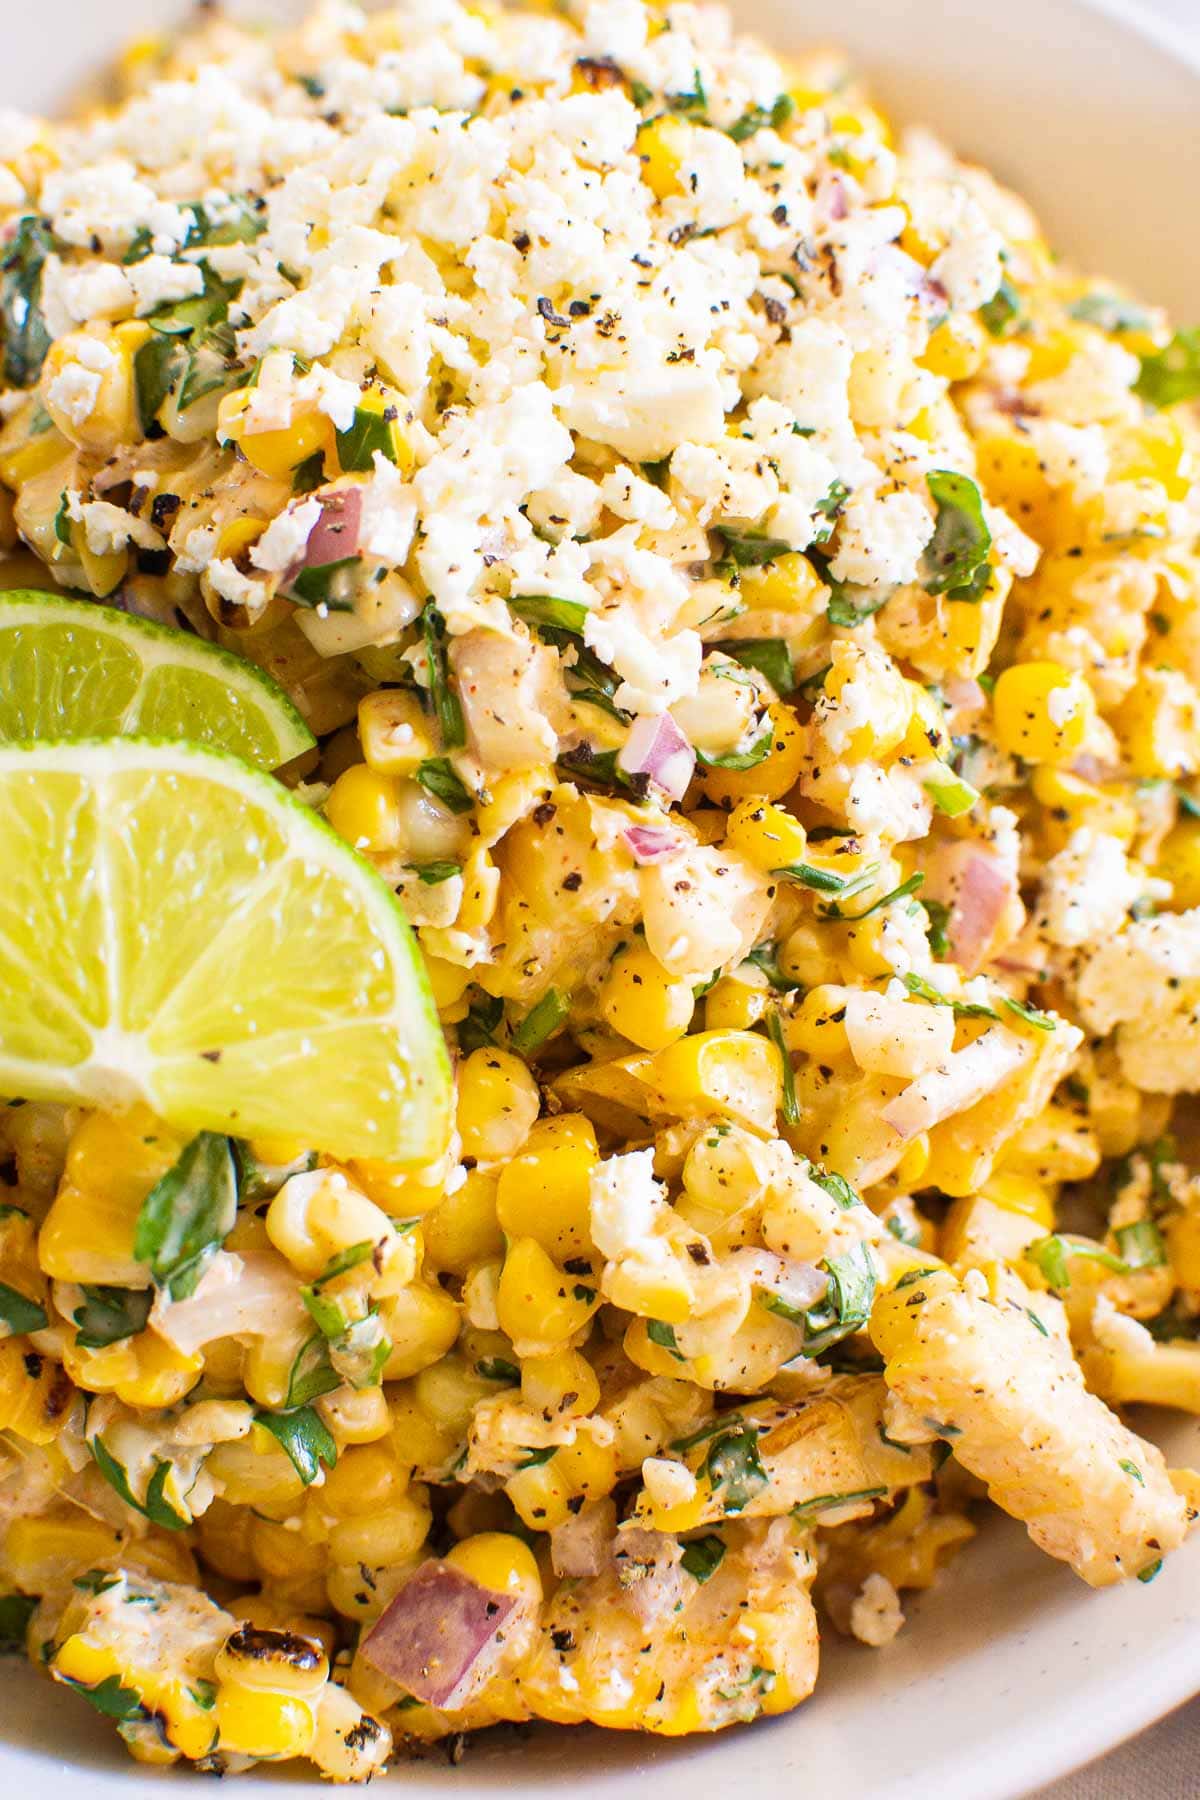 Mexican street corn salad recipe garnished with lime and crumbled cotija cheese.